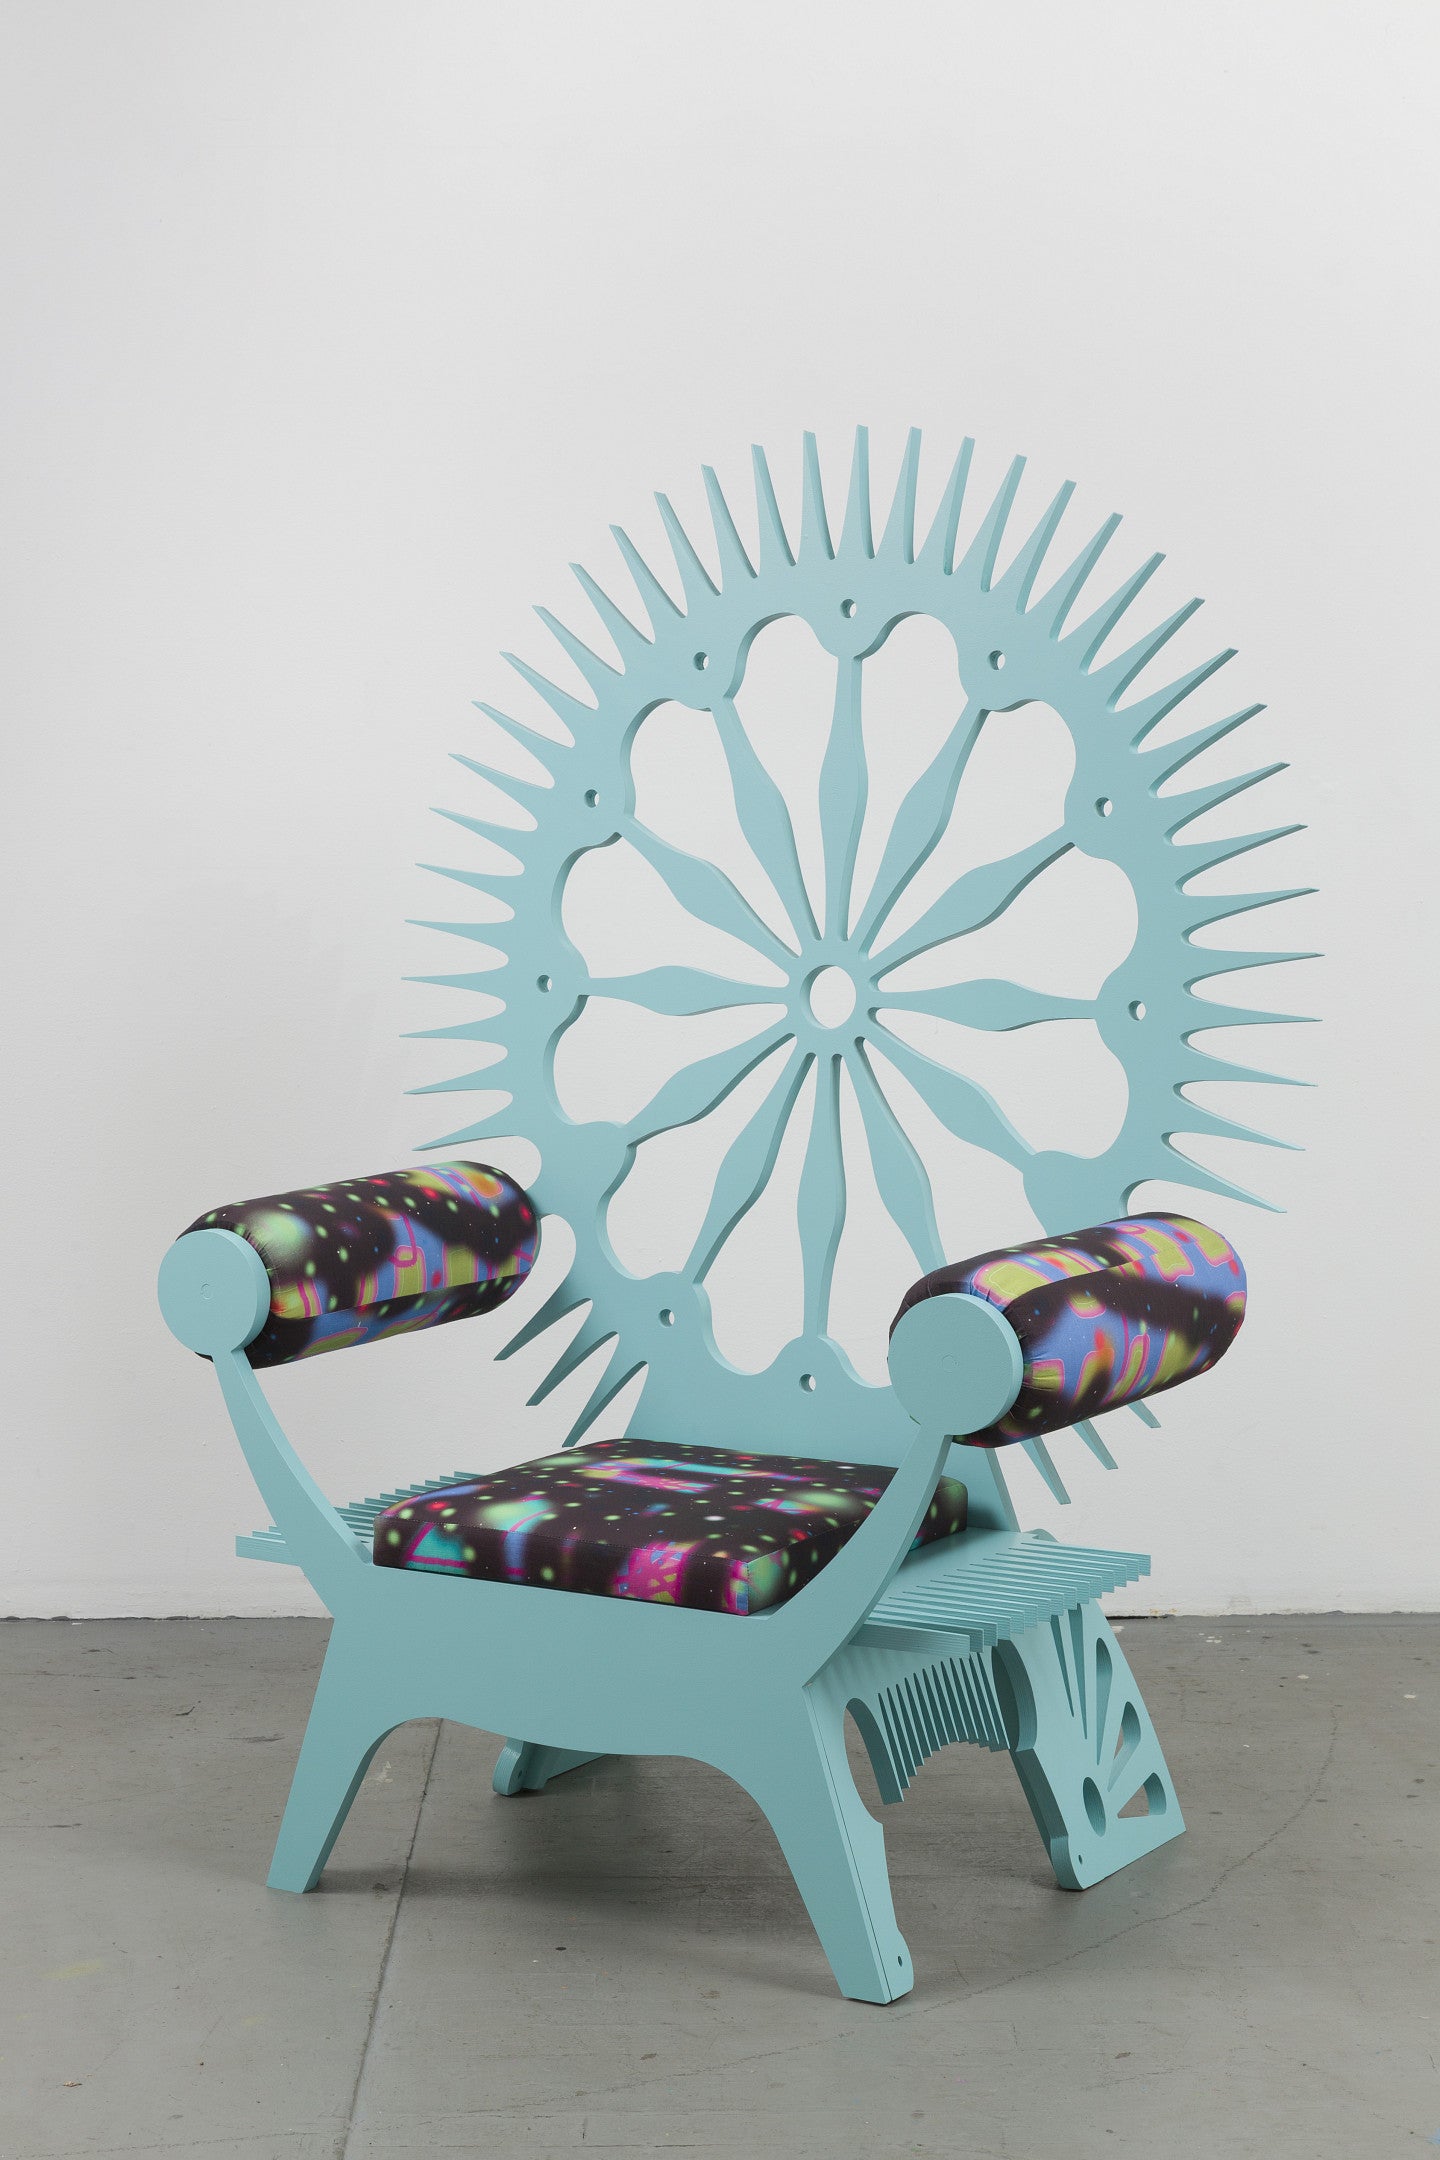 KRONJAV—CHAIR   2022   Wood, enamel paint and artist’s upholstery   64.5 x 48 x 28.5 inches 